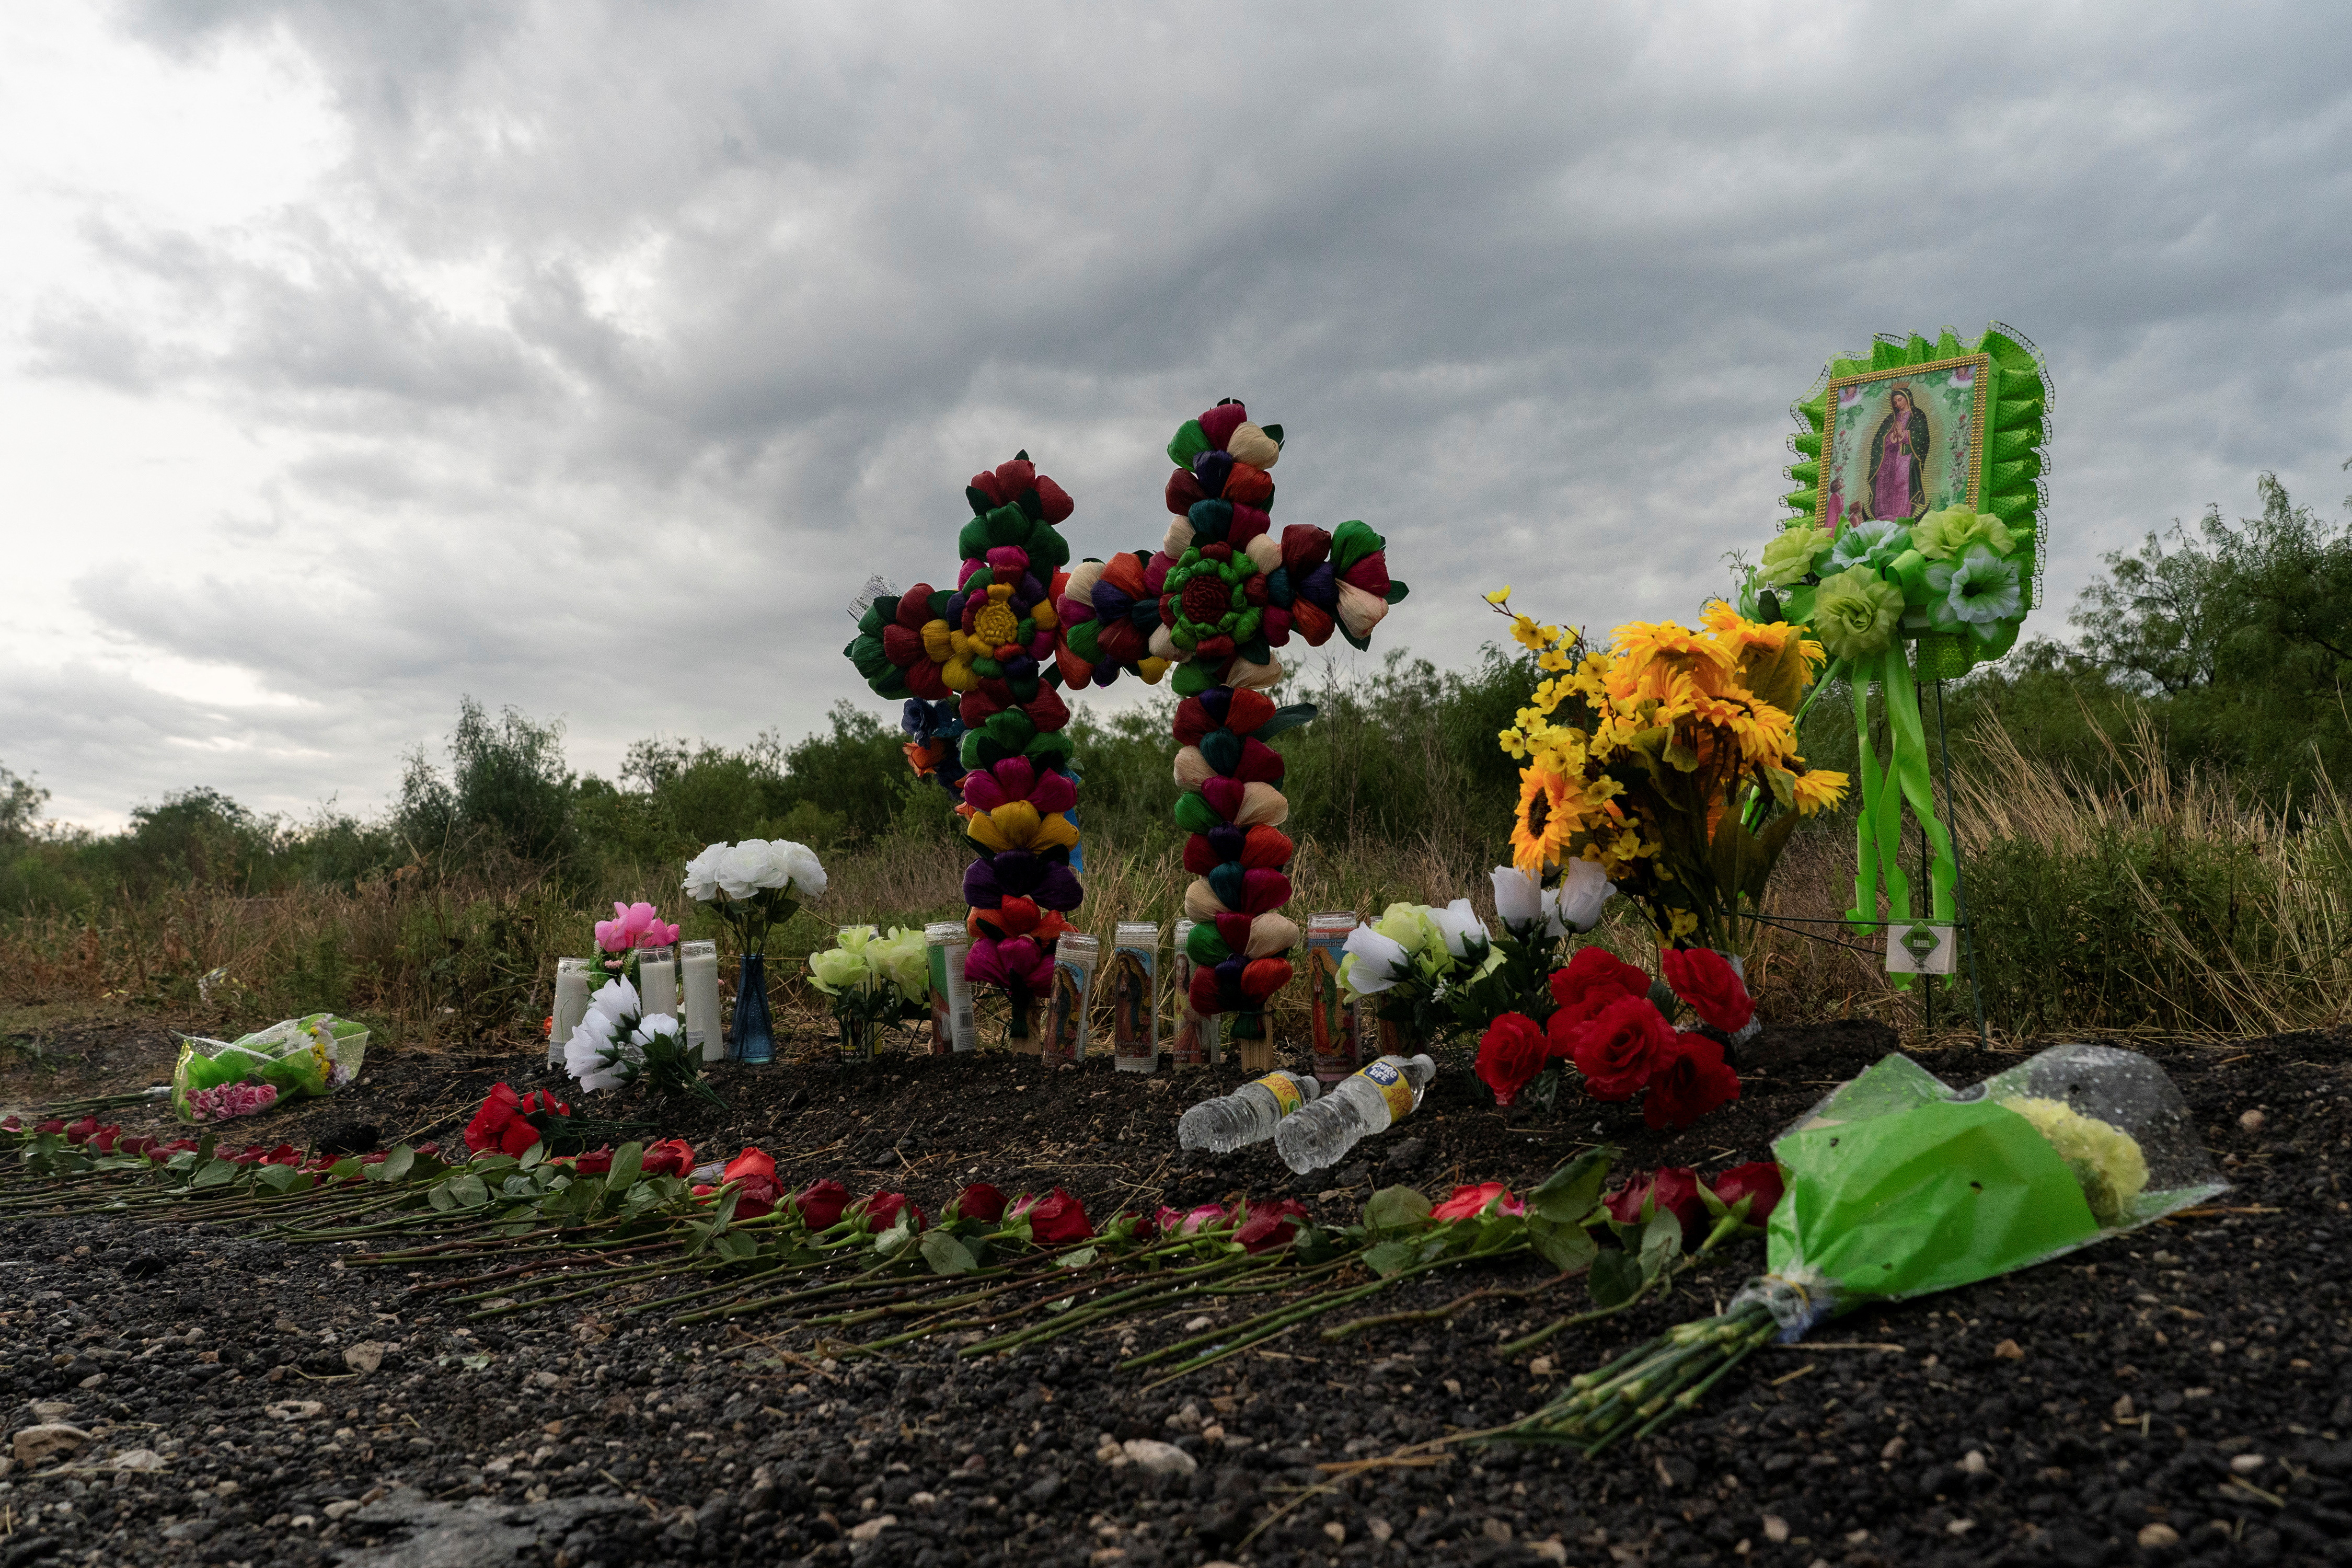 Flowers, candles, and water bottles are placed at the scene where dozens of migrants were found dead inside a trailer truck in San Antonio, Texas, U.S. June 28, 2022. REUTERS/Go Nakamura